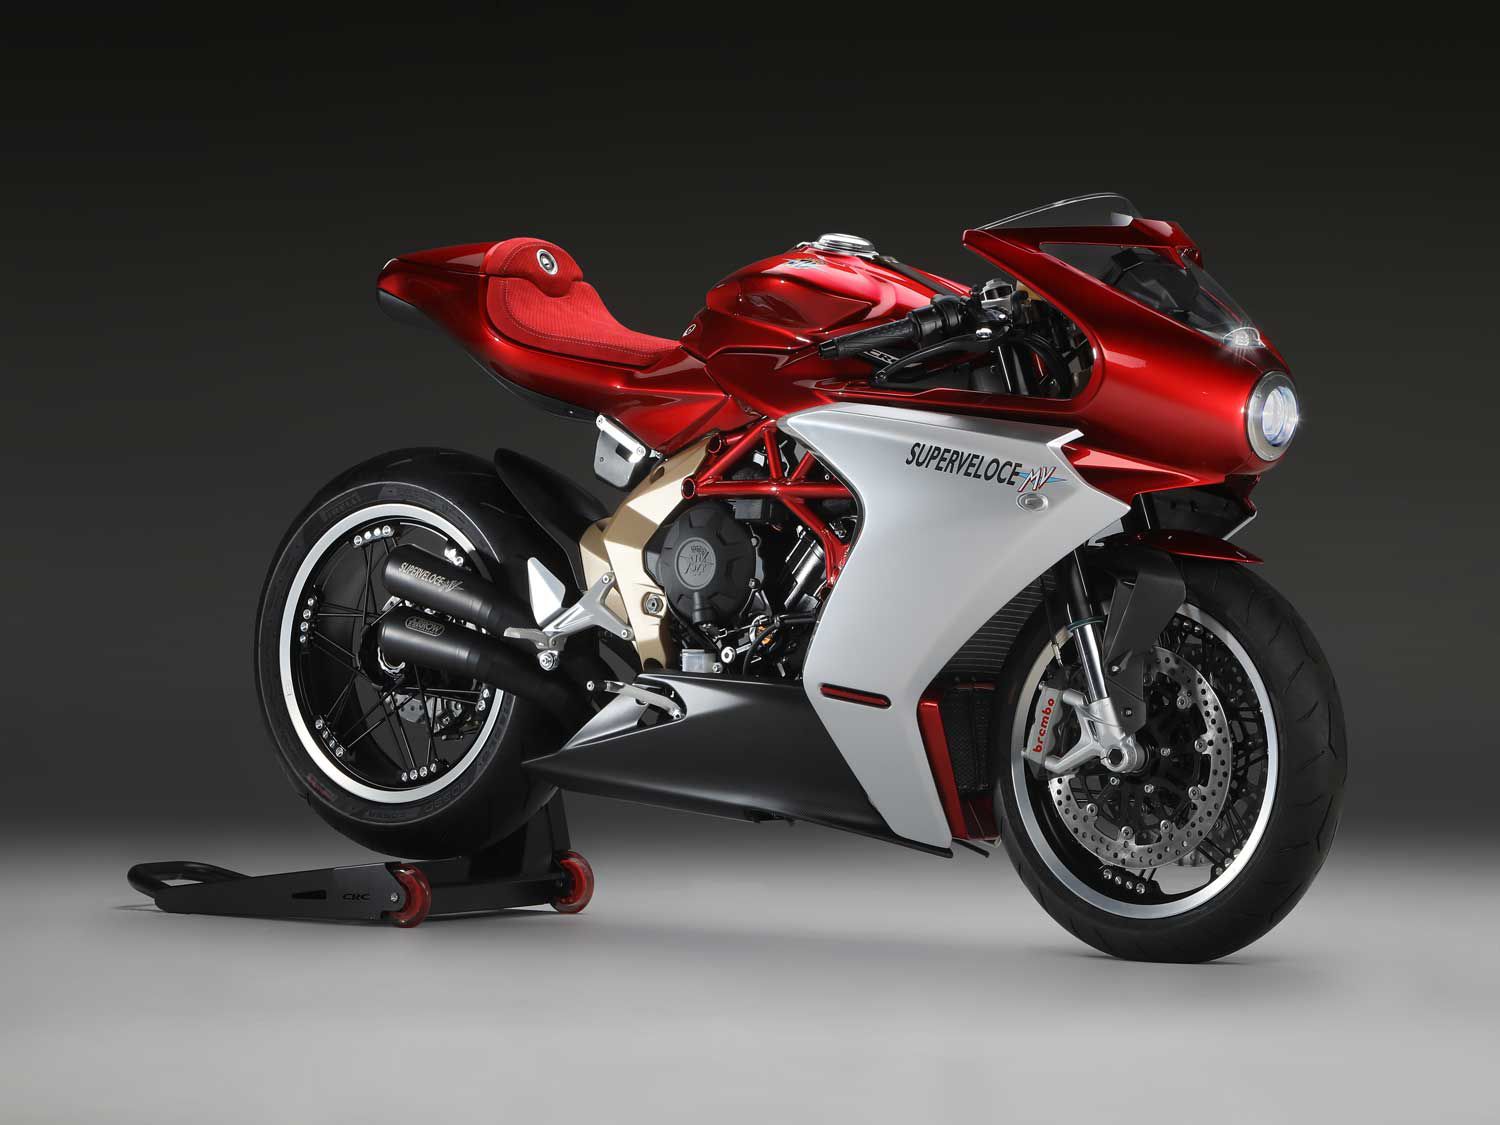 Best Looking 2020 Motorcycle? MV Agusta Superveloce 800